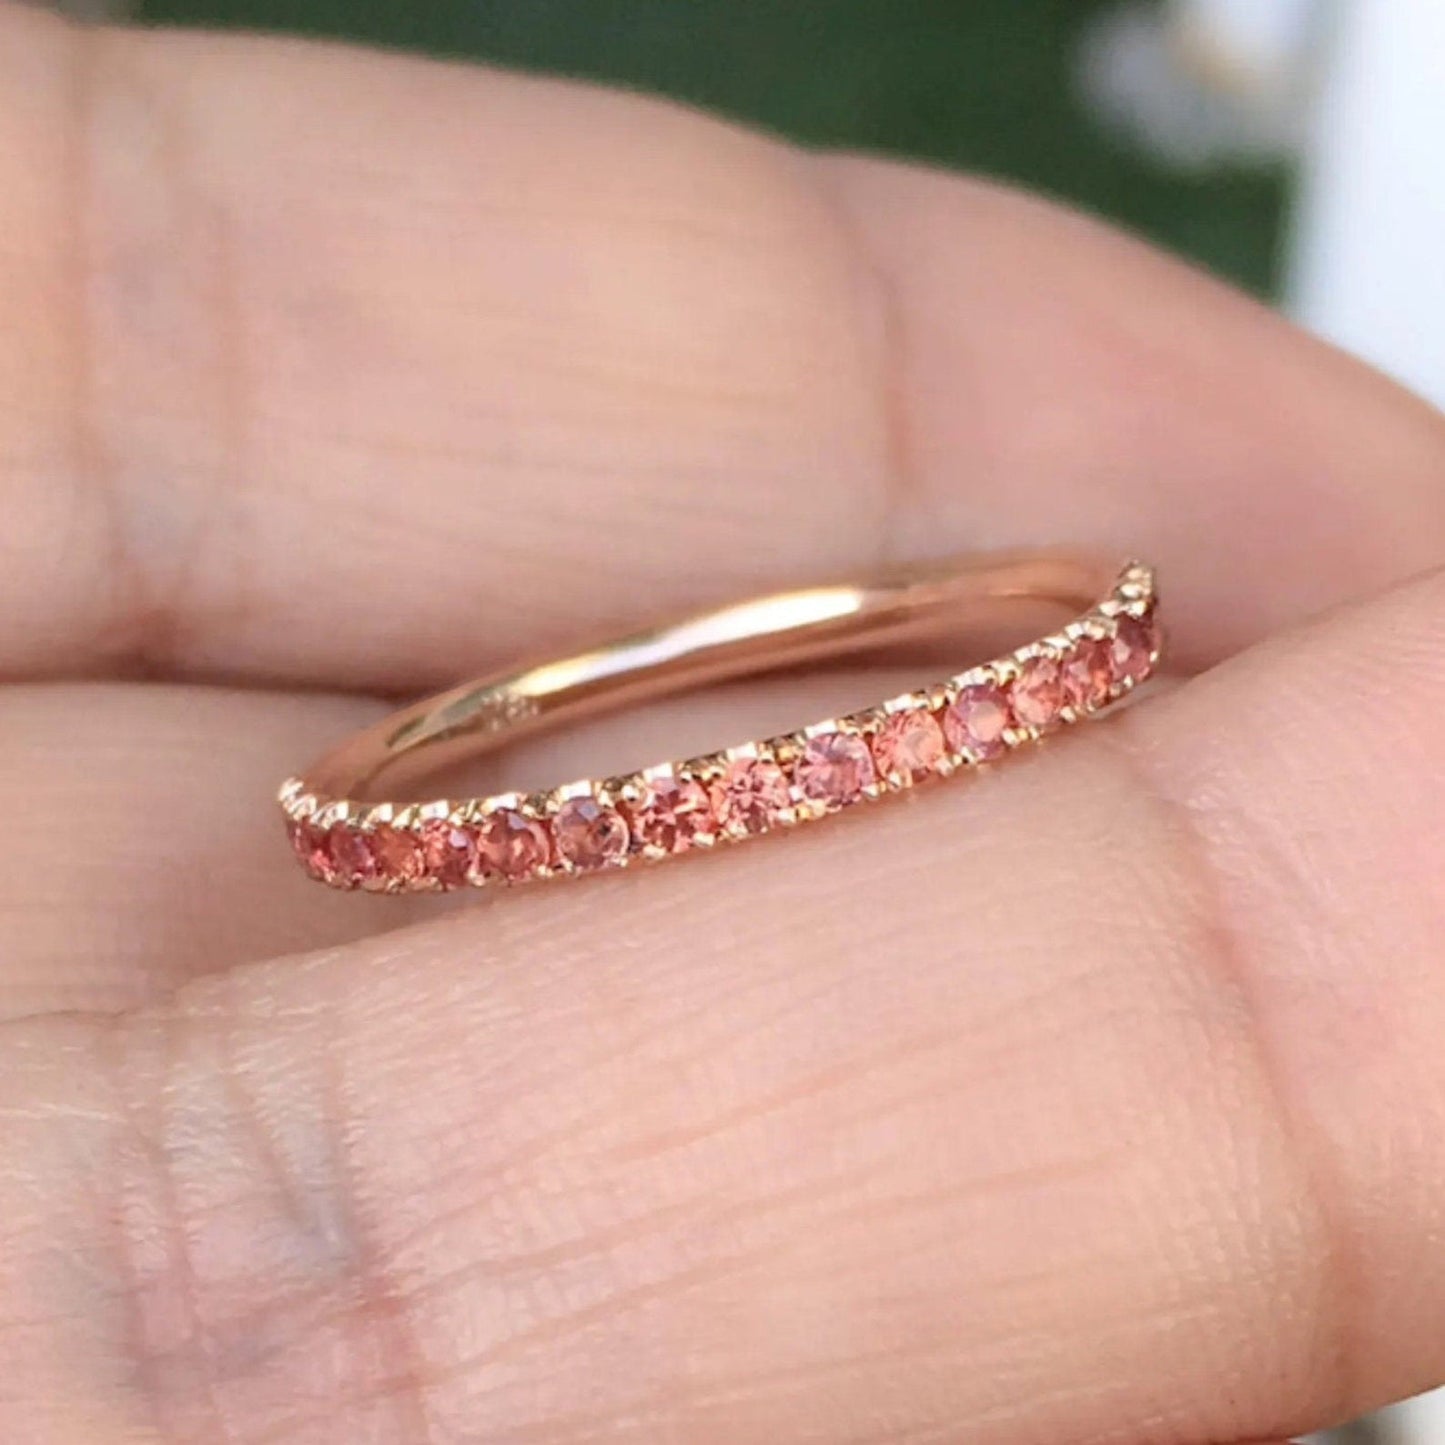 Reserved for Chrystal/ 2.3mm Half Eternity Stacking Ring with Padparadscha Orange Sapphires